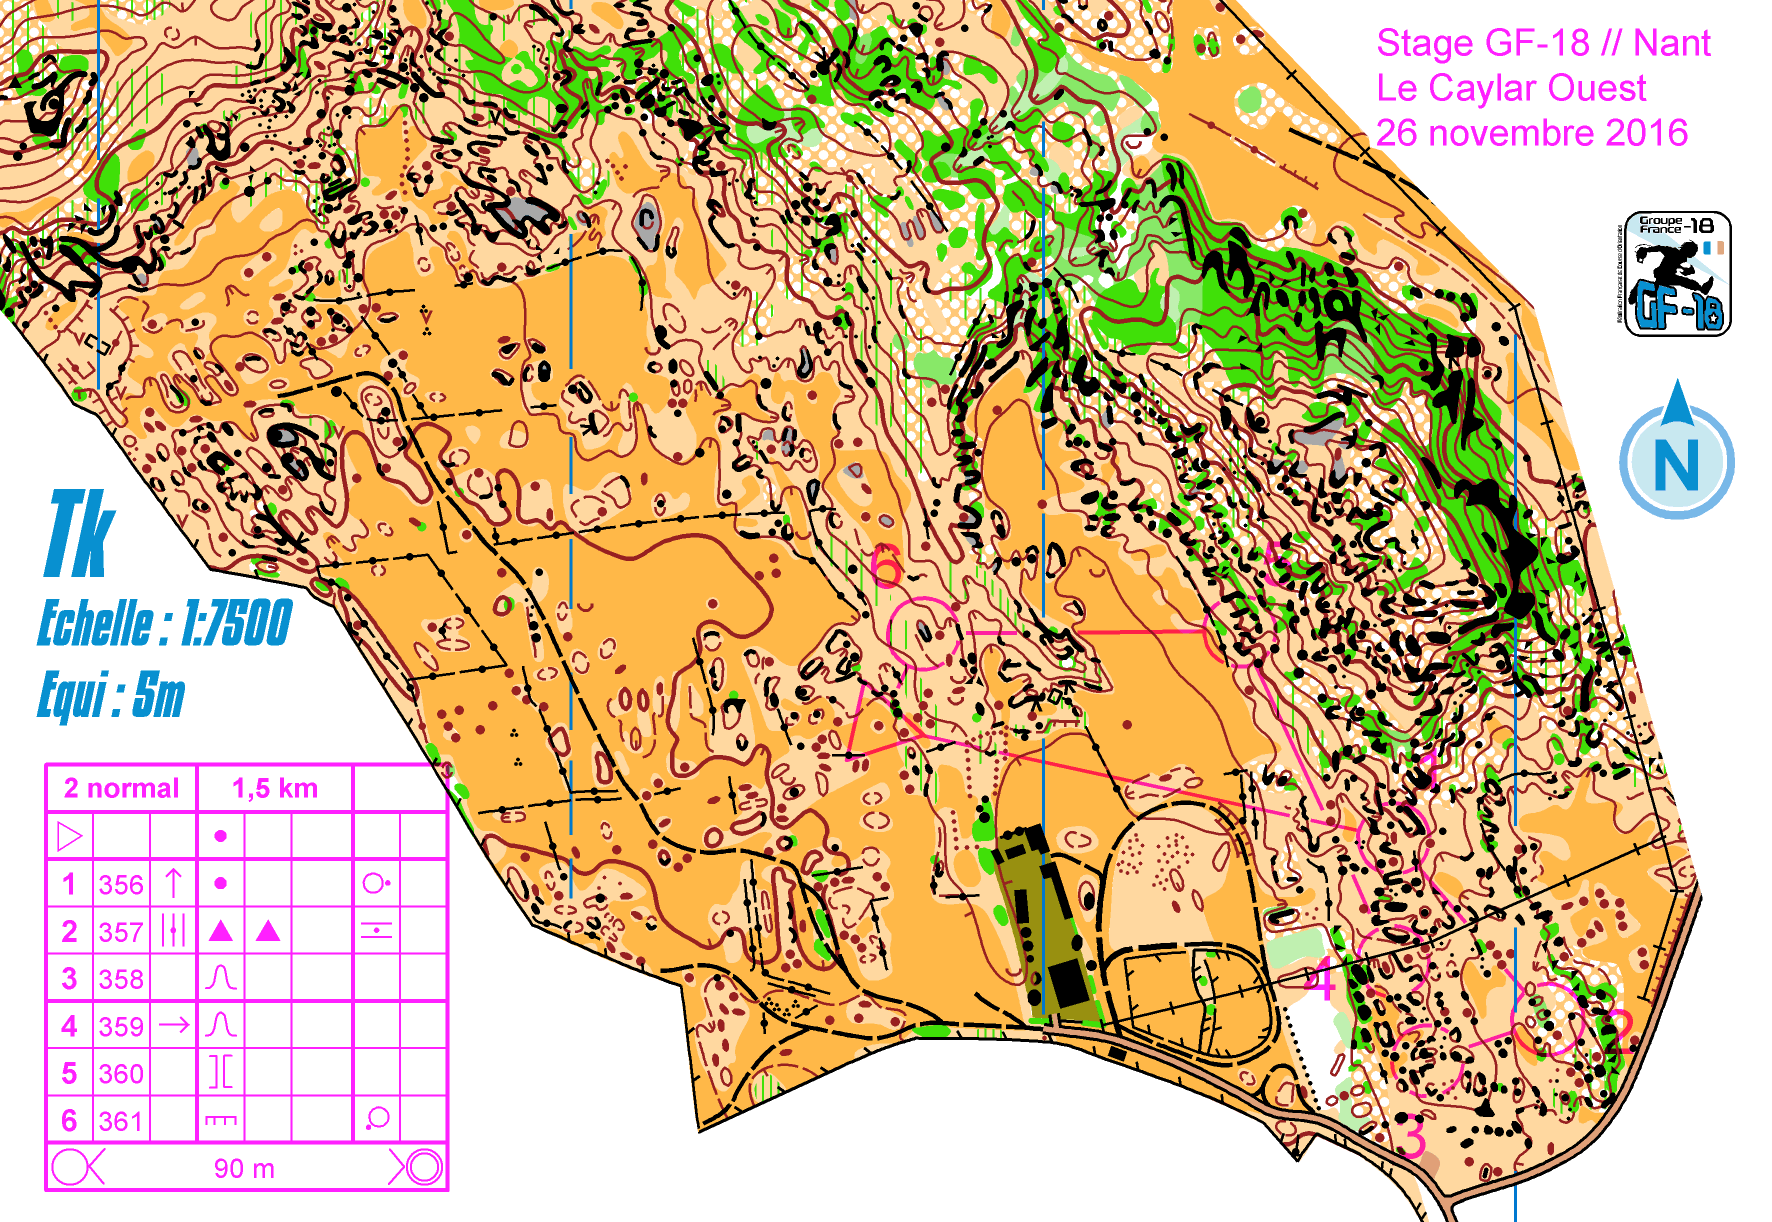 J2 circuit normal stage gf-18 Larzac Caylar Ouest (26.11.2016)